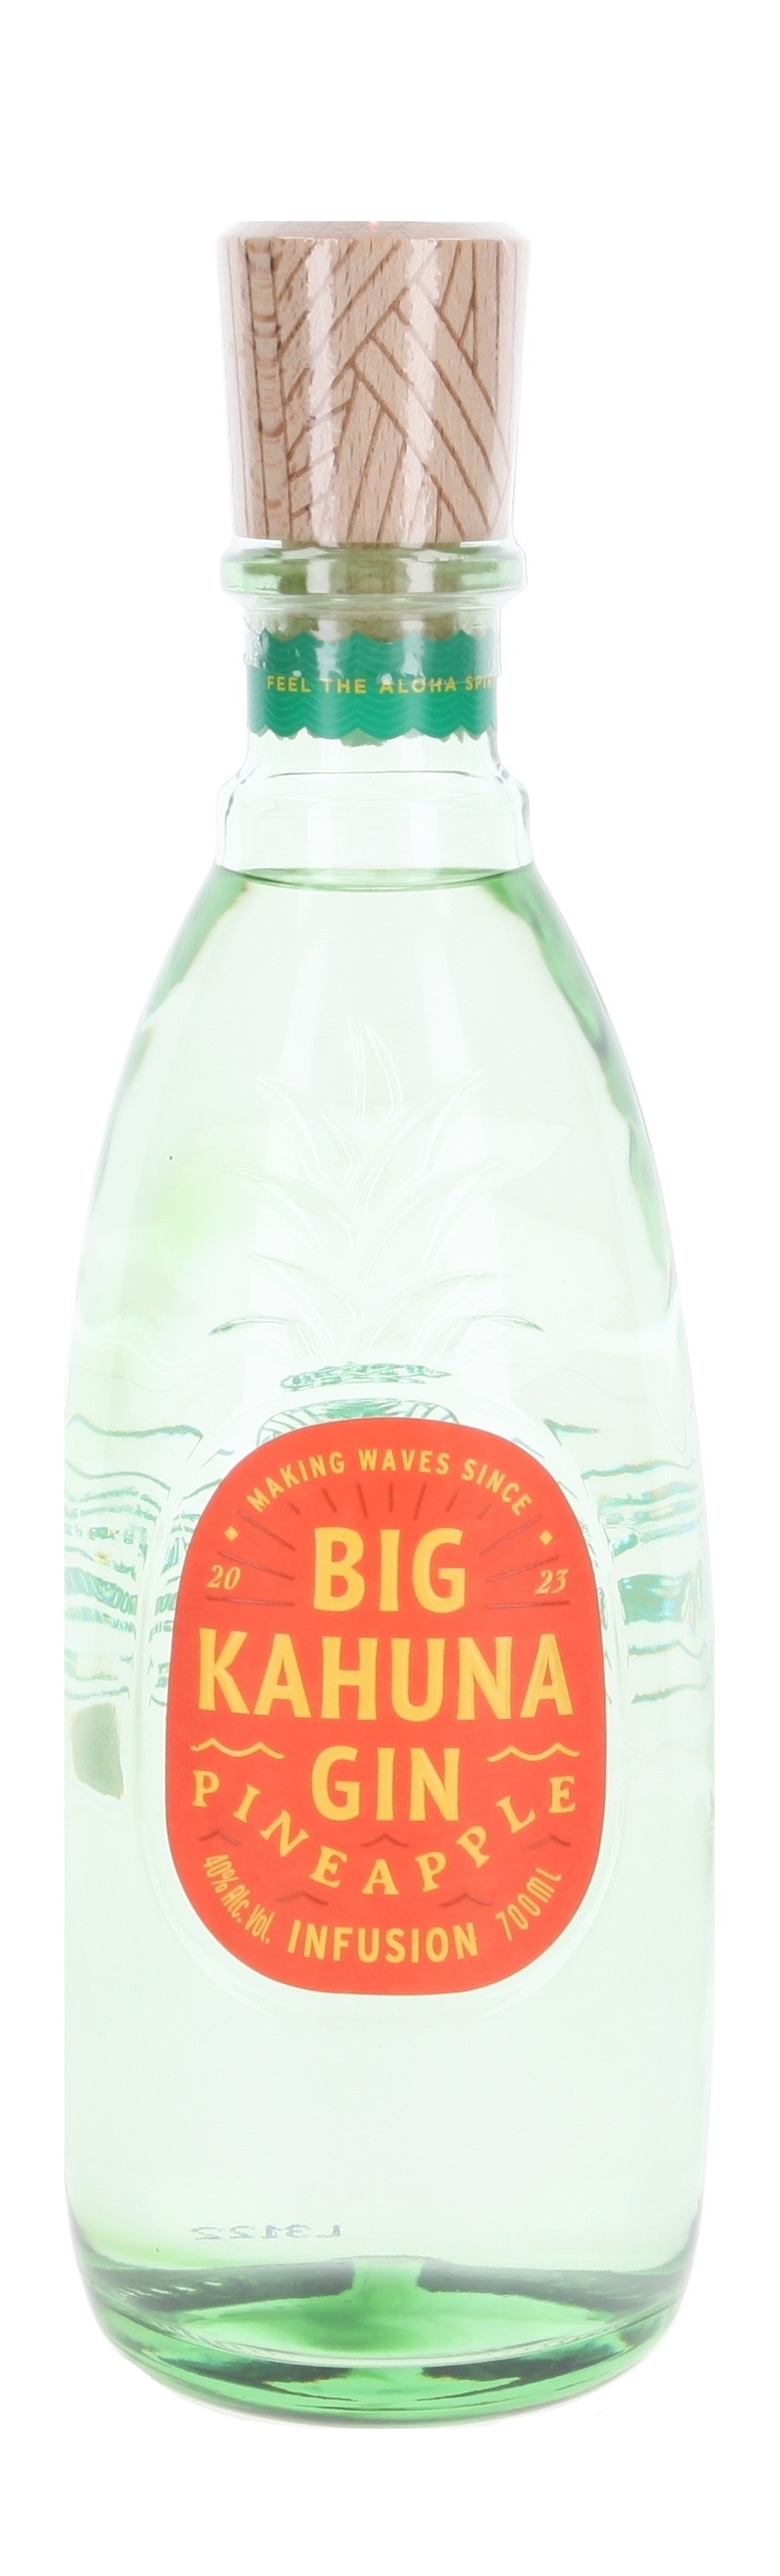 Pineapple Whisky.de Kahuna Gin | » Infusion online store the Big To